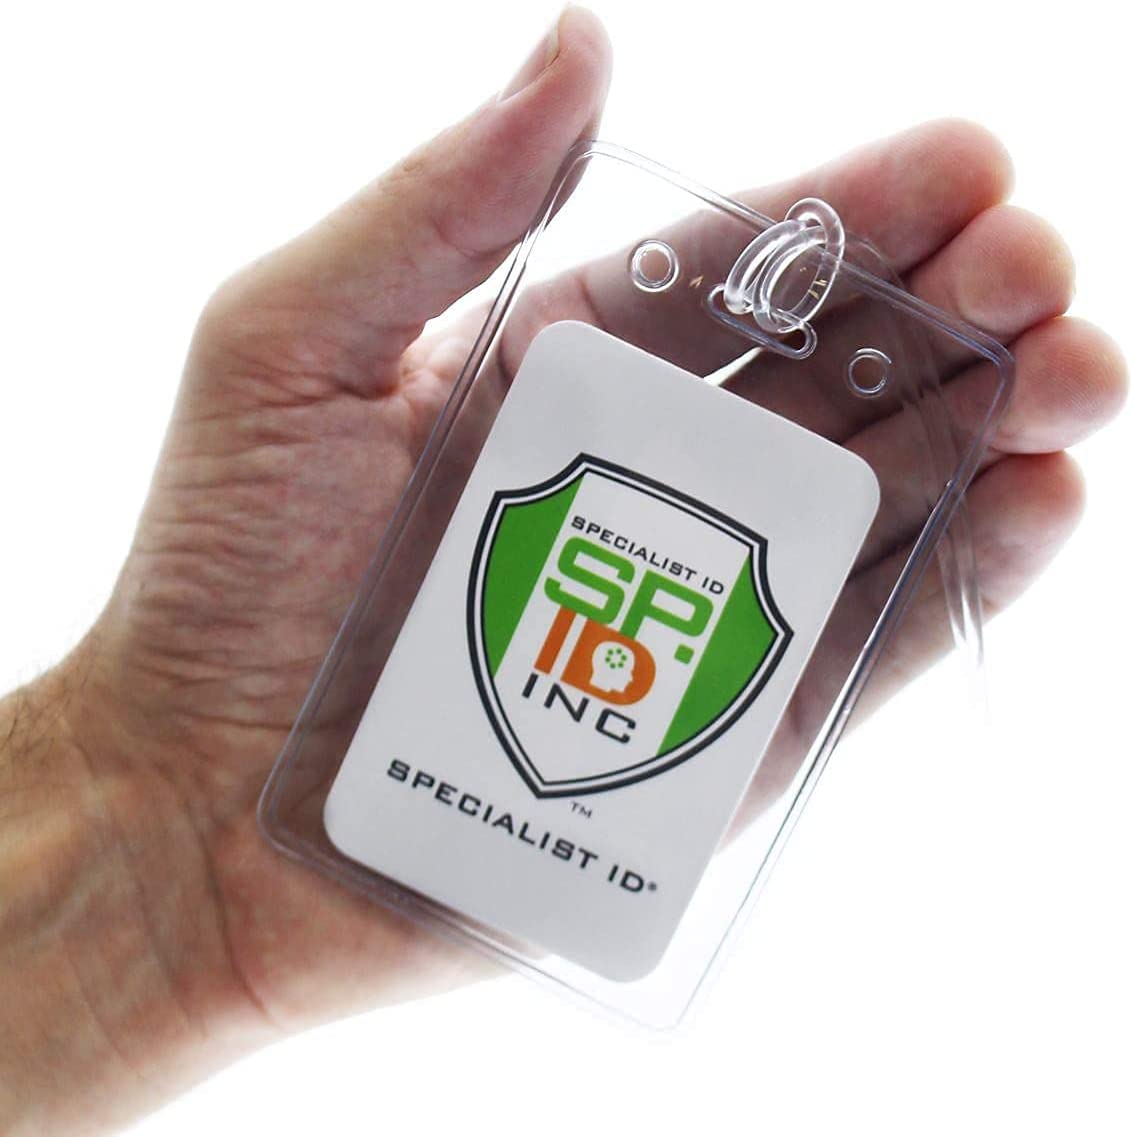 Clear Plastic Luggage Identification Tags with Loops Included - Business Card or Photo Insert (Locking Top)